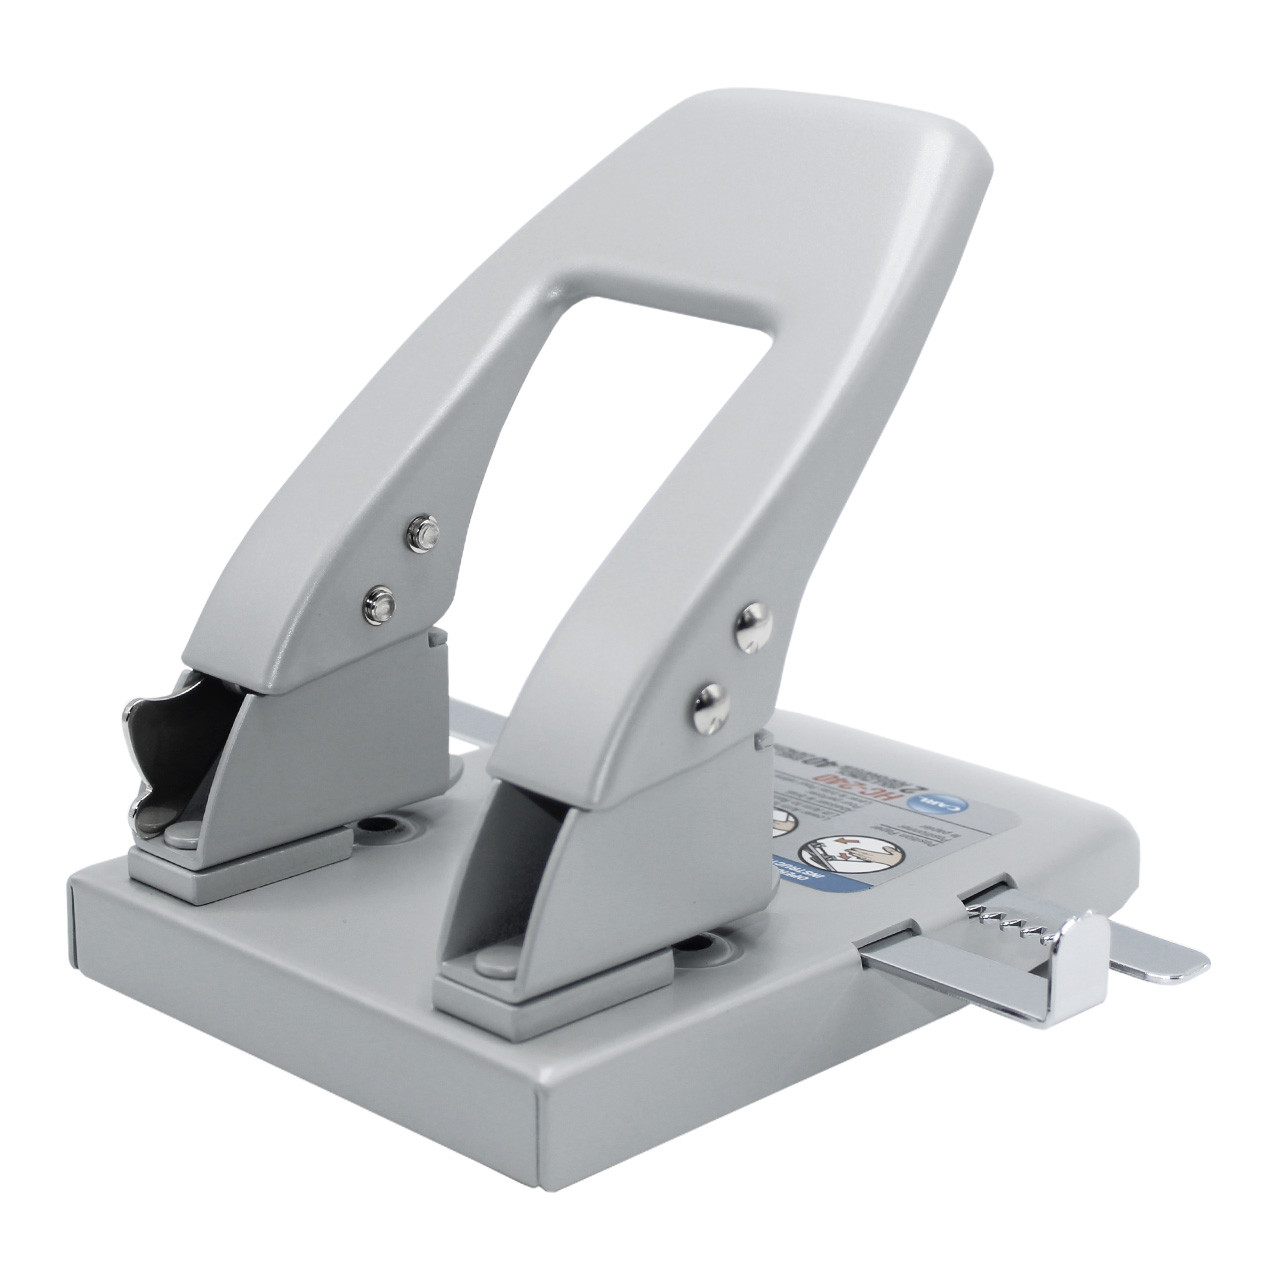 Carl 40-Page Top and Side 2-Hole Punch